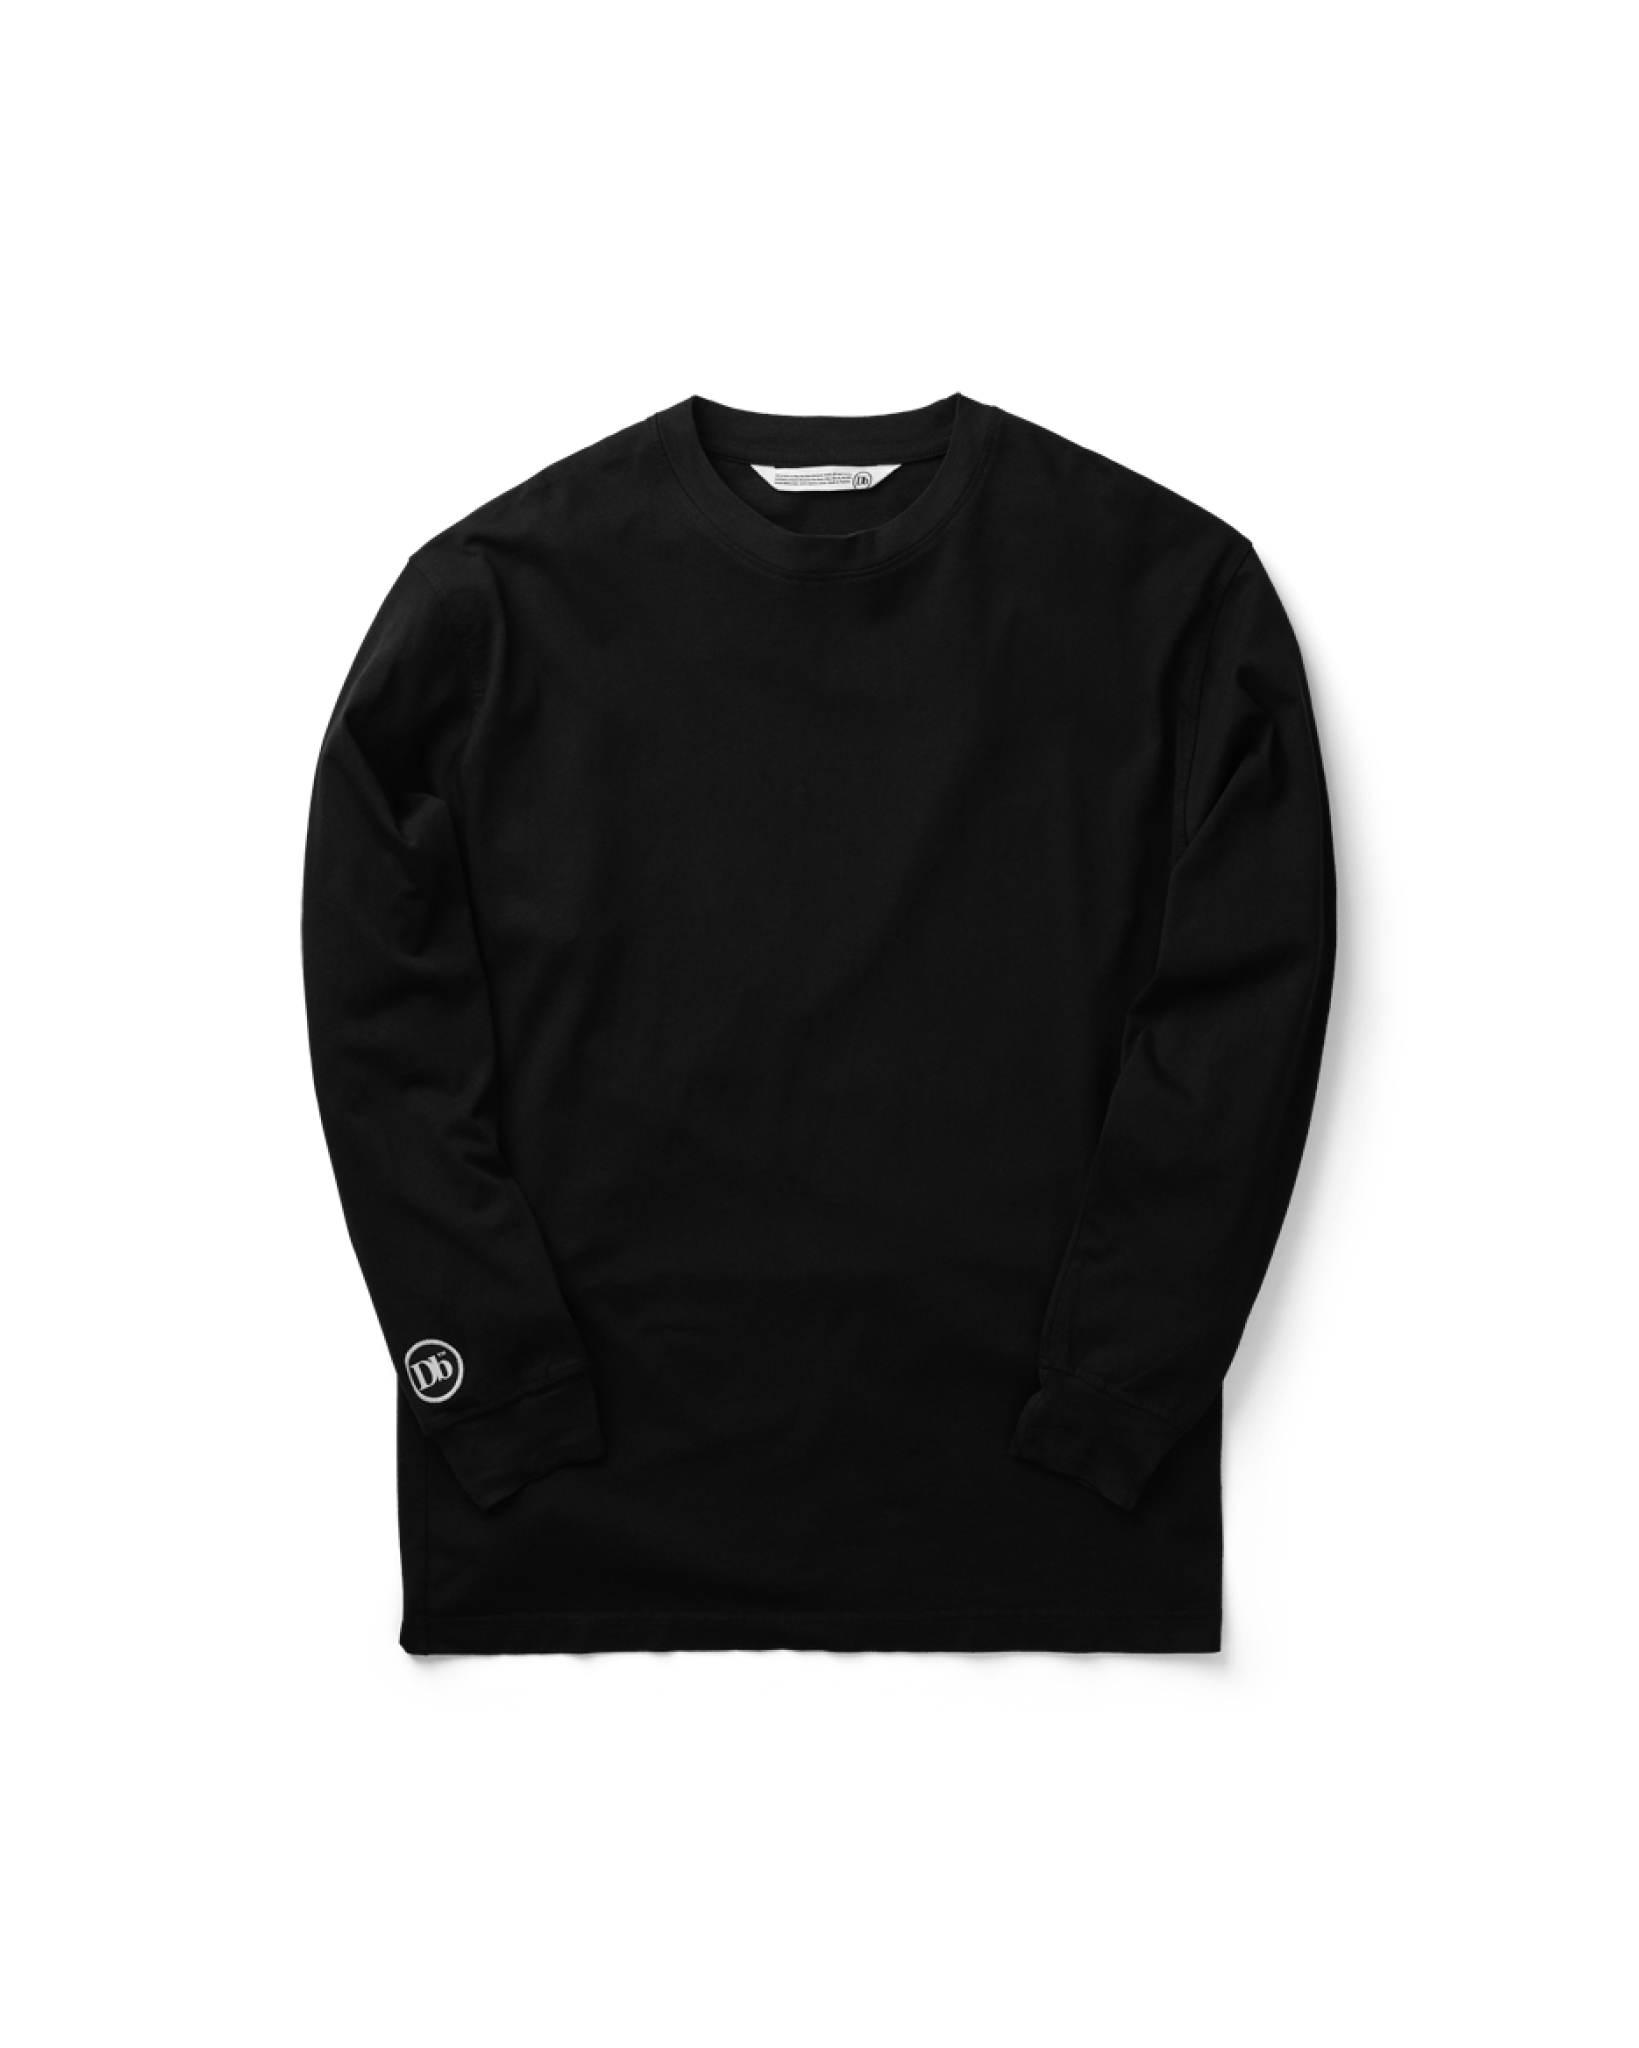 Anywear Long Sleeve Black Out - S